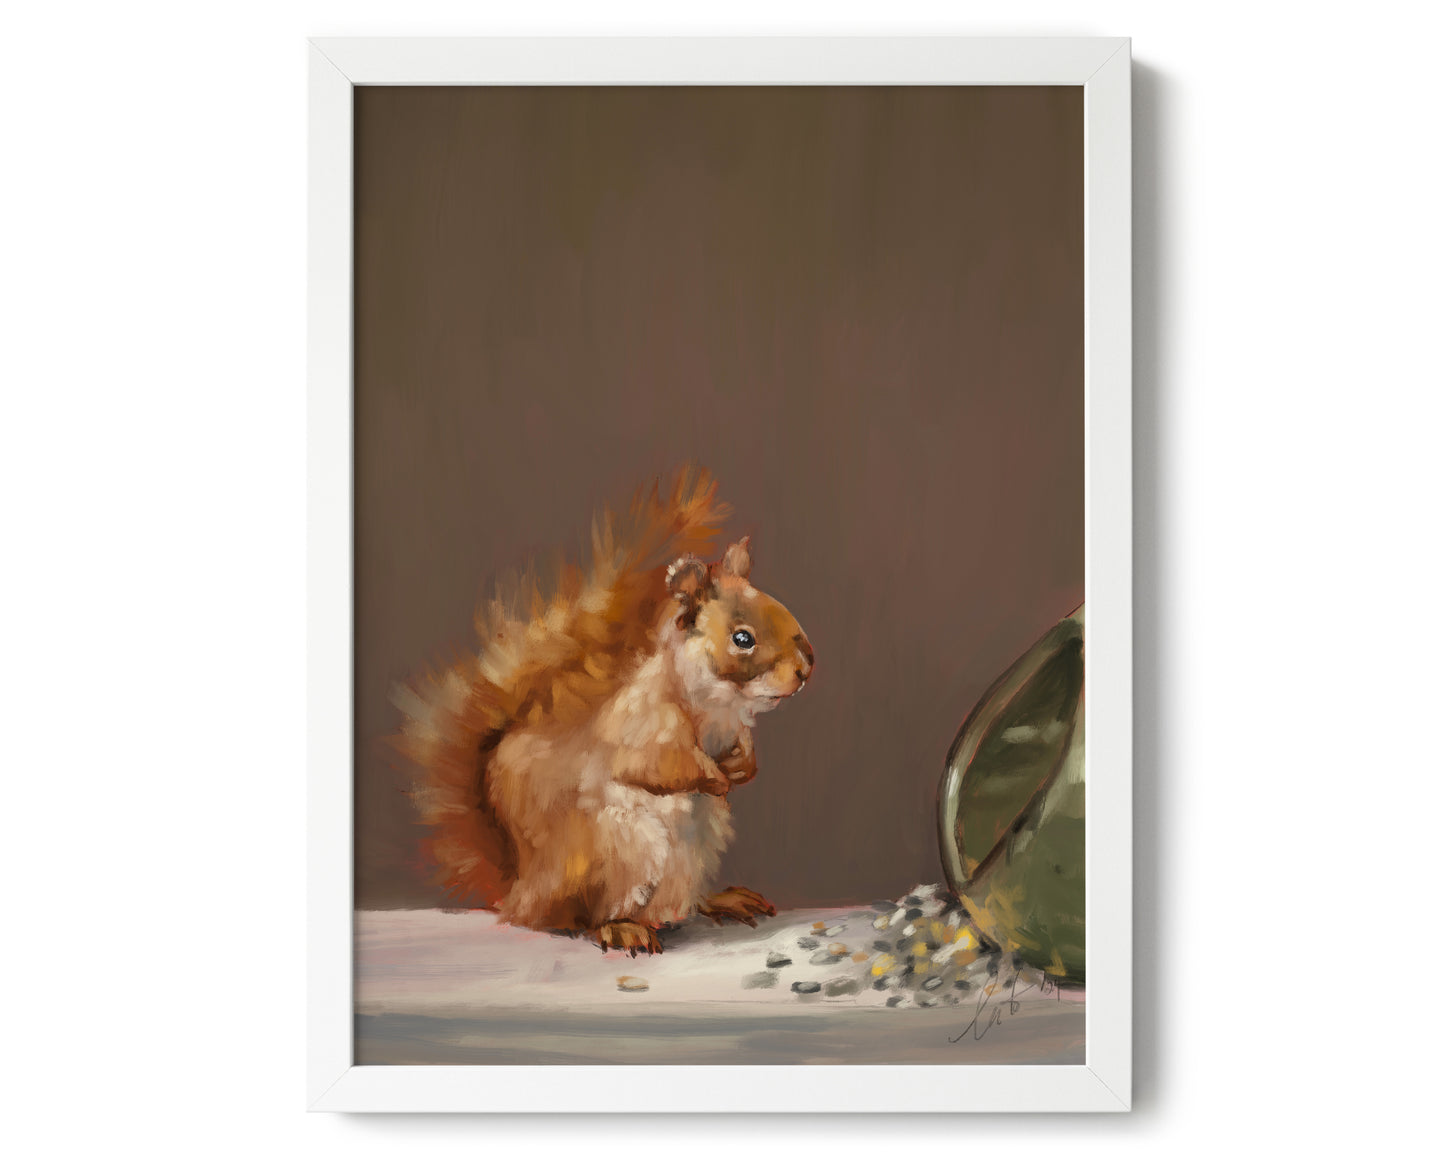 "Titi the Squirrel" by Catherine Hébert - Red Squirrel Oil Painting Giclée Art Print - 12"x16" size